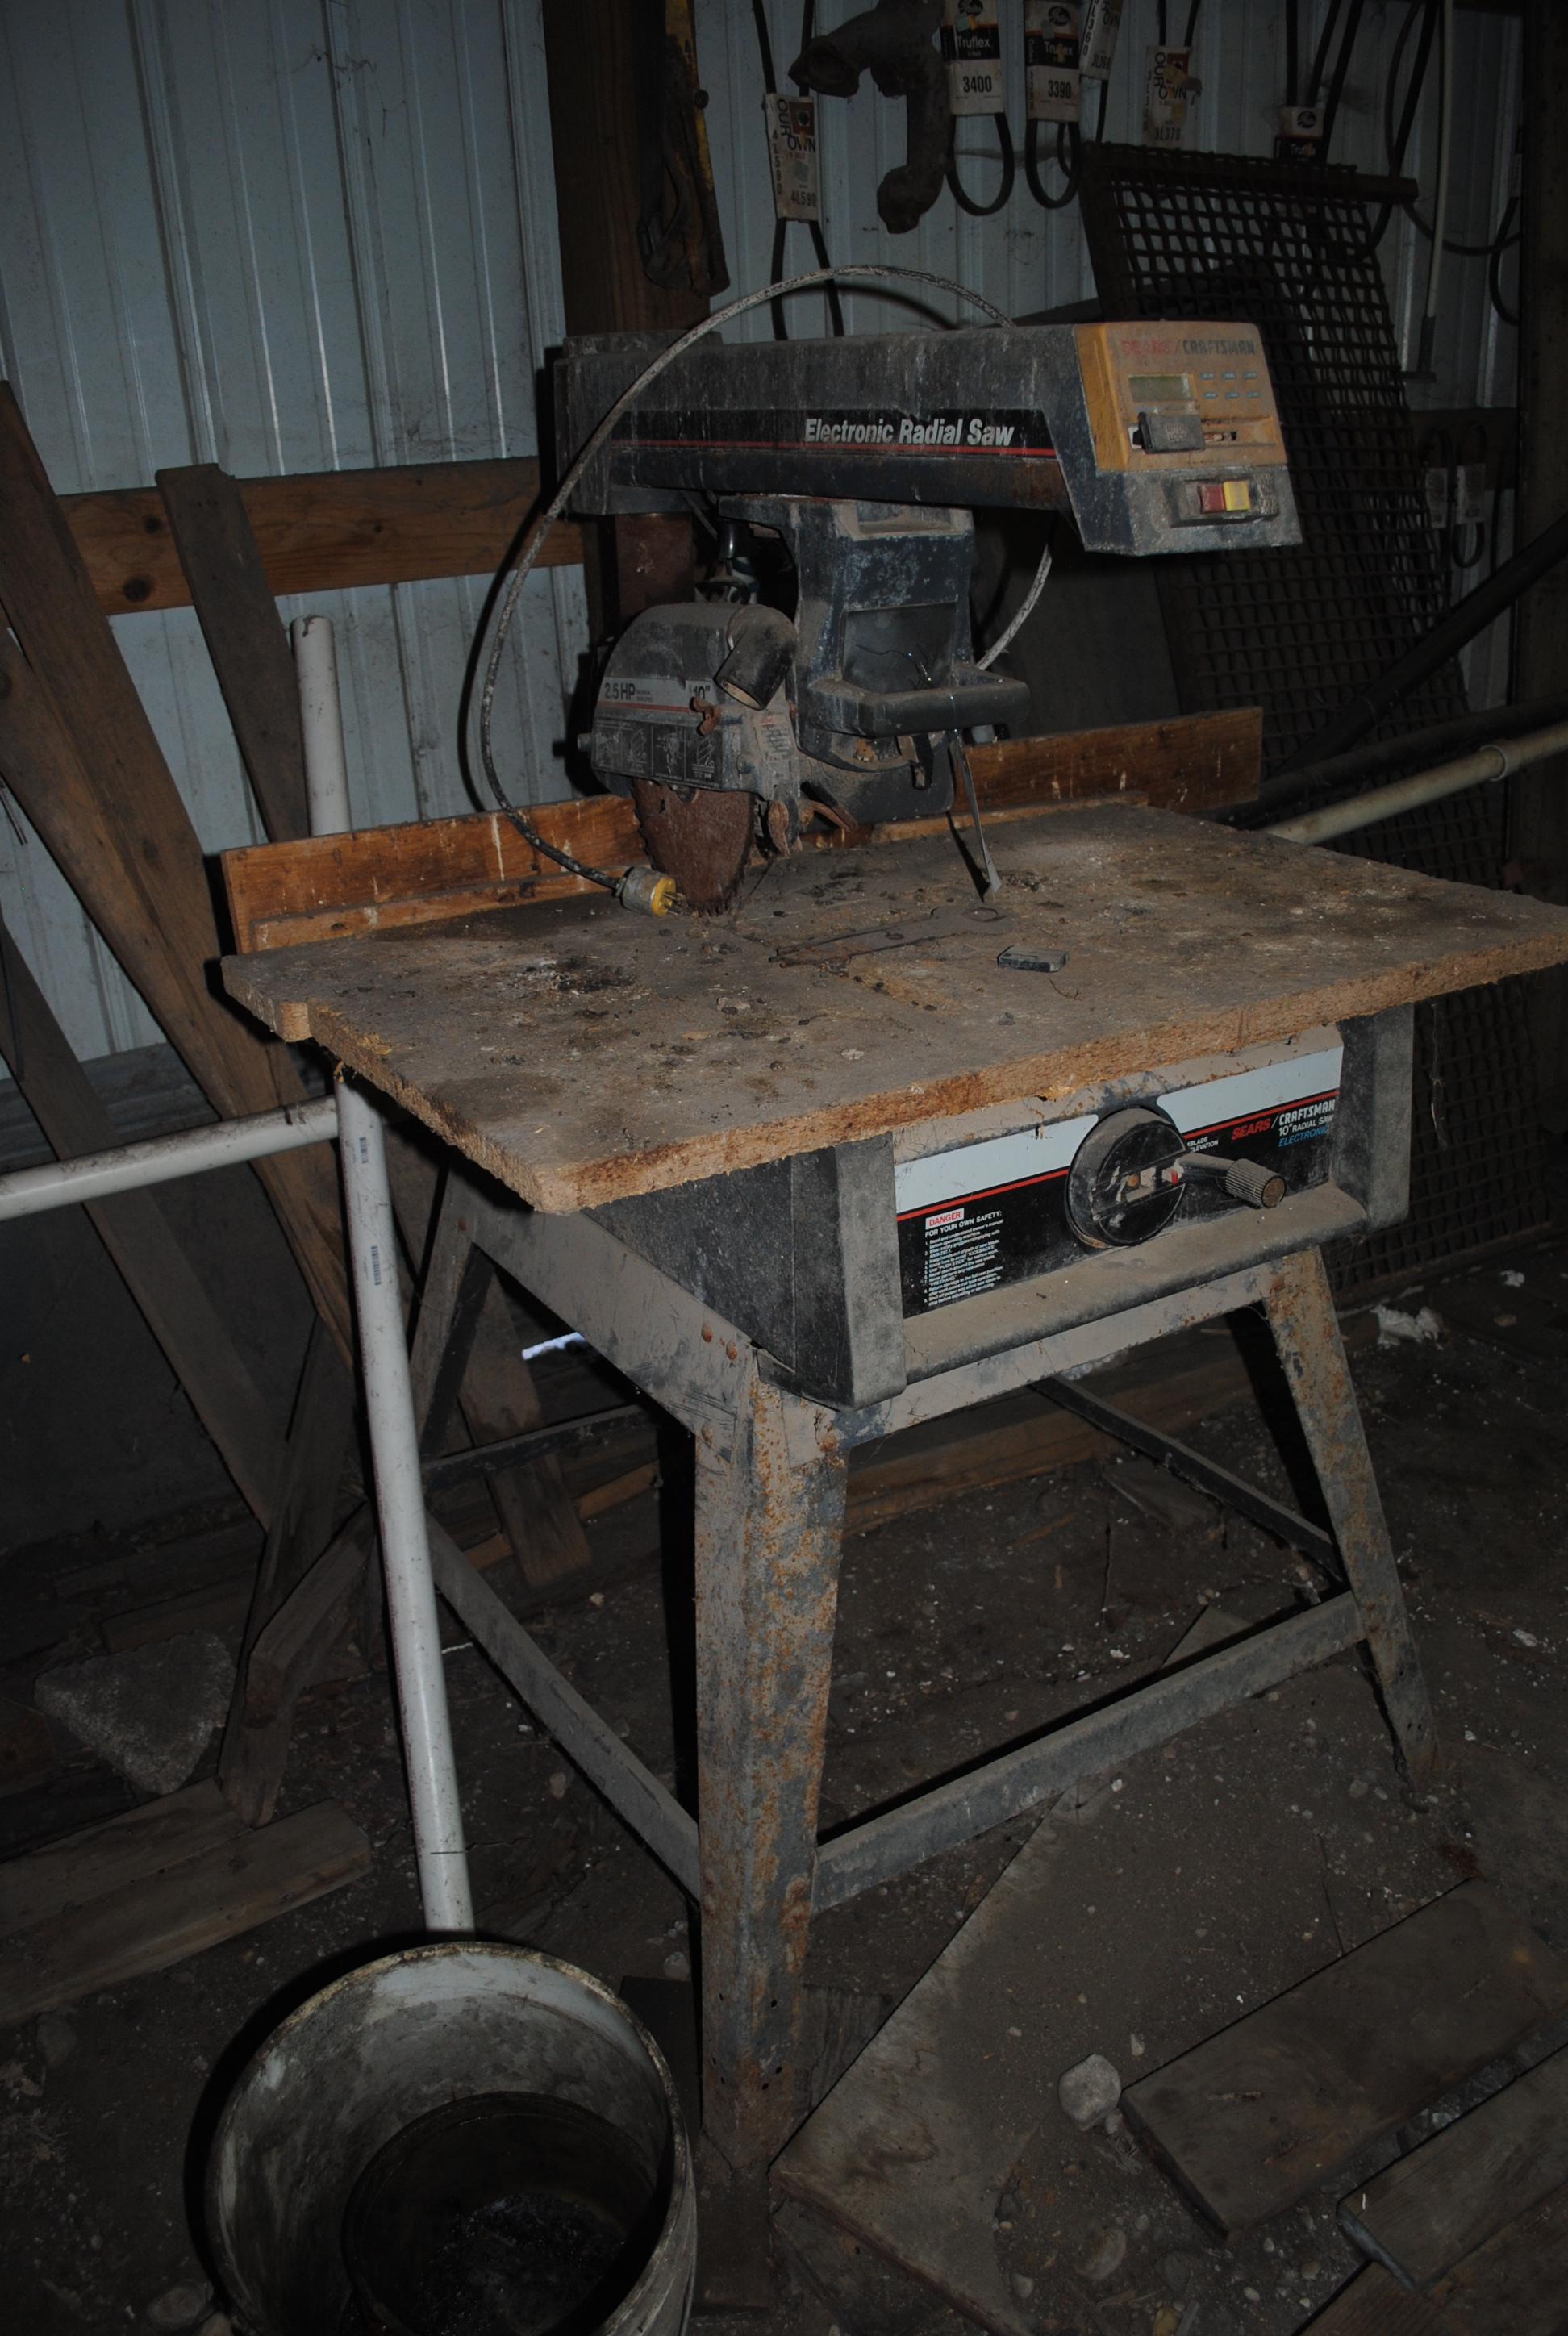 Craftsman Radial Arm Saw with manual